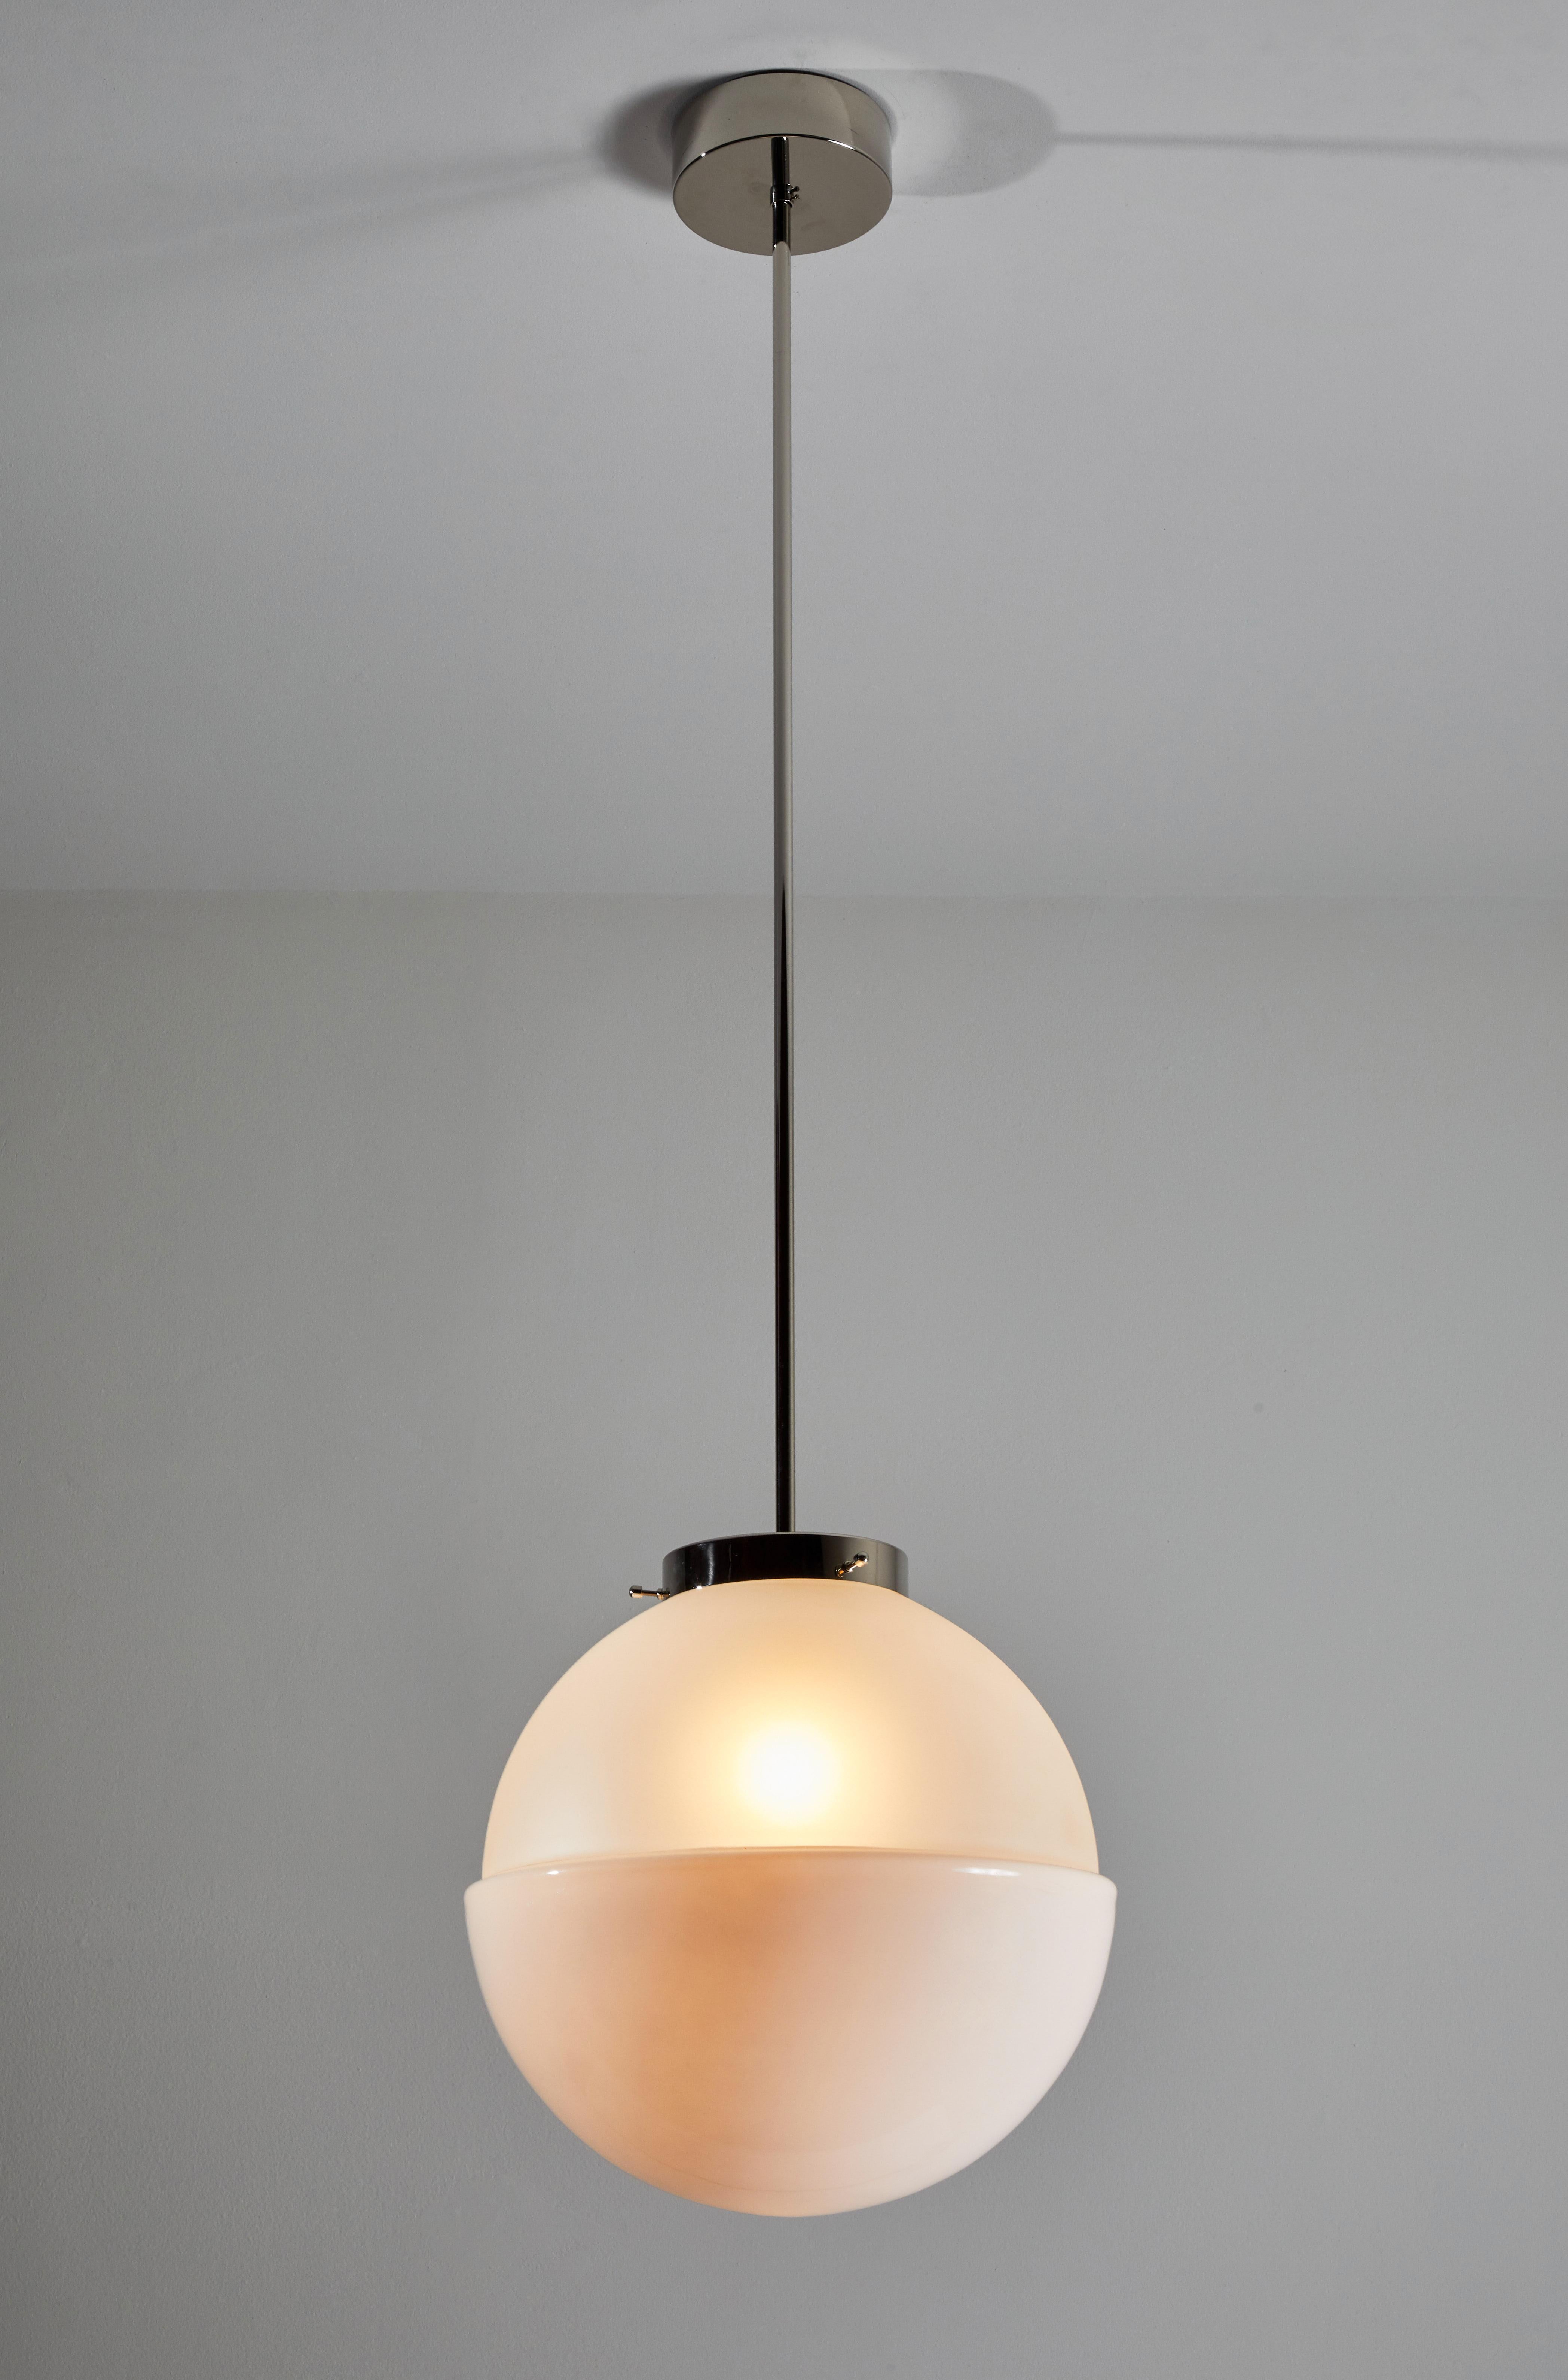 HMB 29/400 pendant by Marianne Brandt. Manufactured in Germany by Tecnolumen. This is a current production that was originally designed in 1928. Nickel plated hardware, opaque and frosted glass diffuser. Rewired for U.S. junction boxes. Takes one E